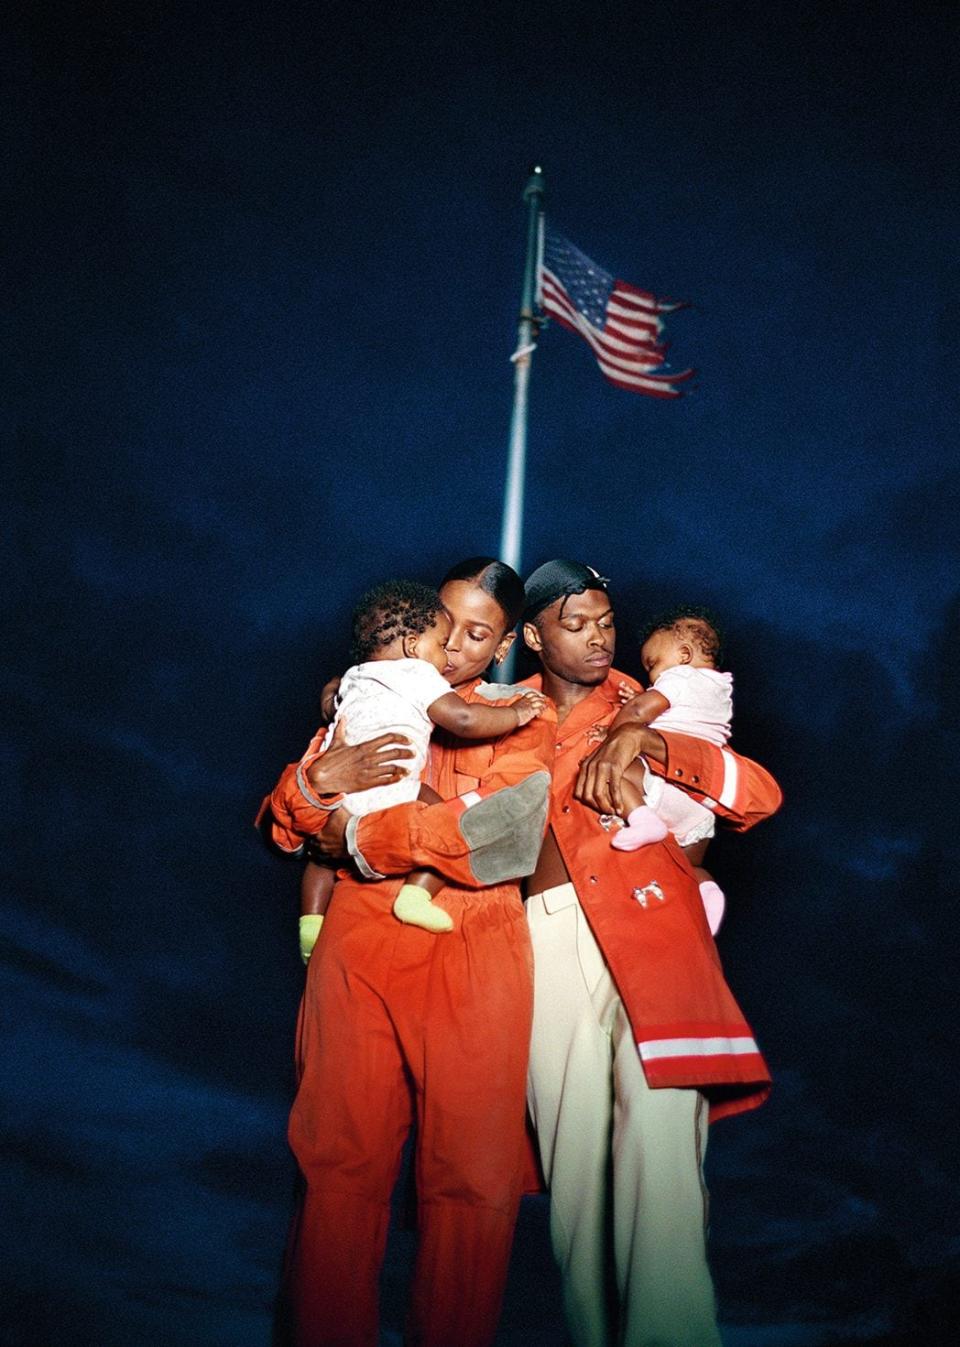 All American Family Portrait, 2018  - Tyler Mitchell